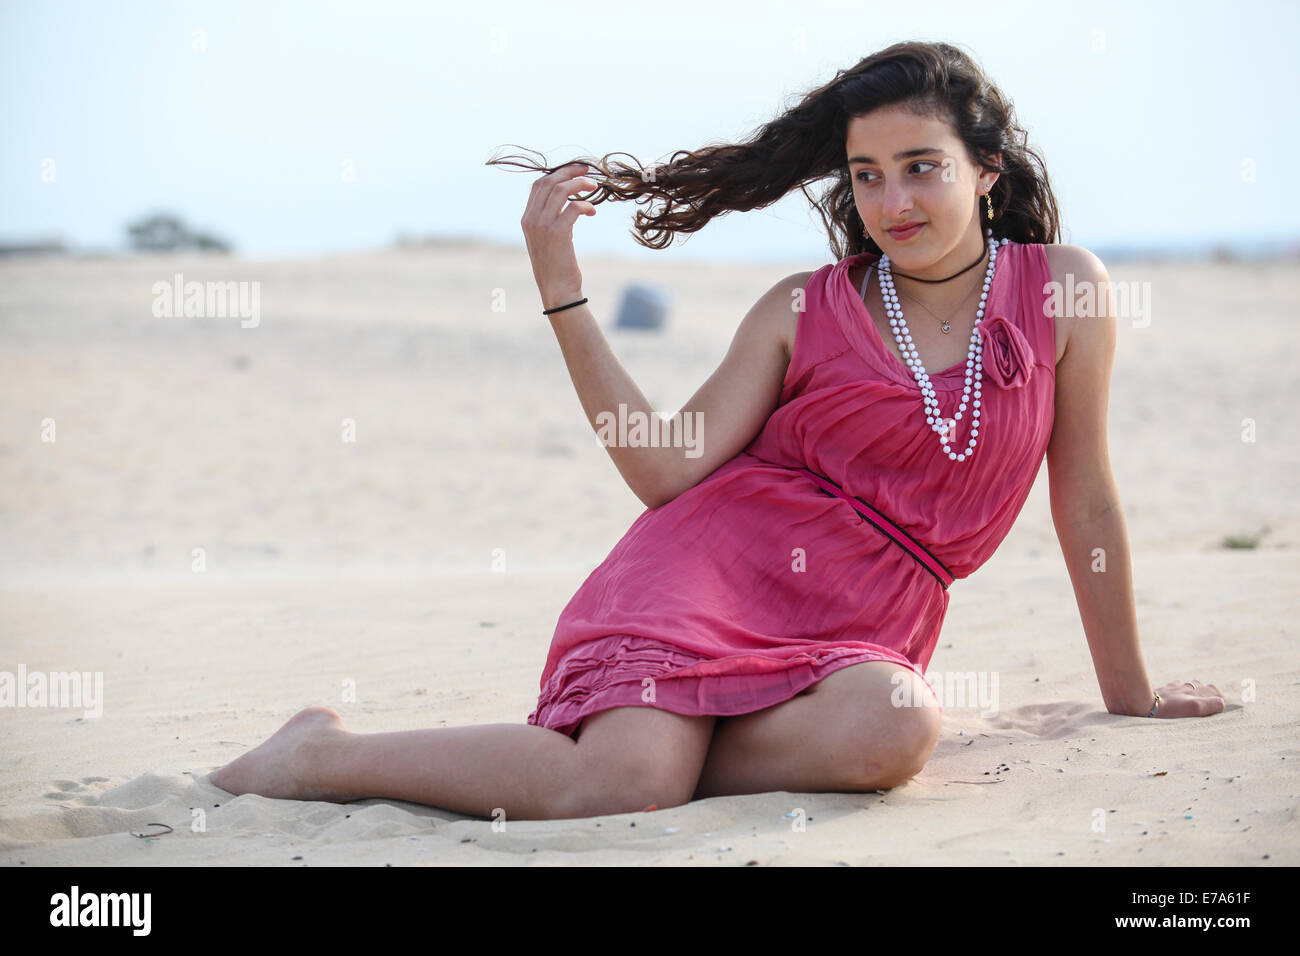 naked preteen girls 9 - 11 y.o. small little naked Alamy